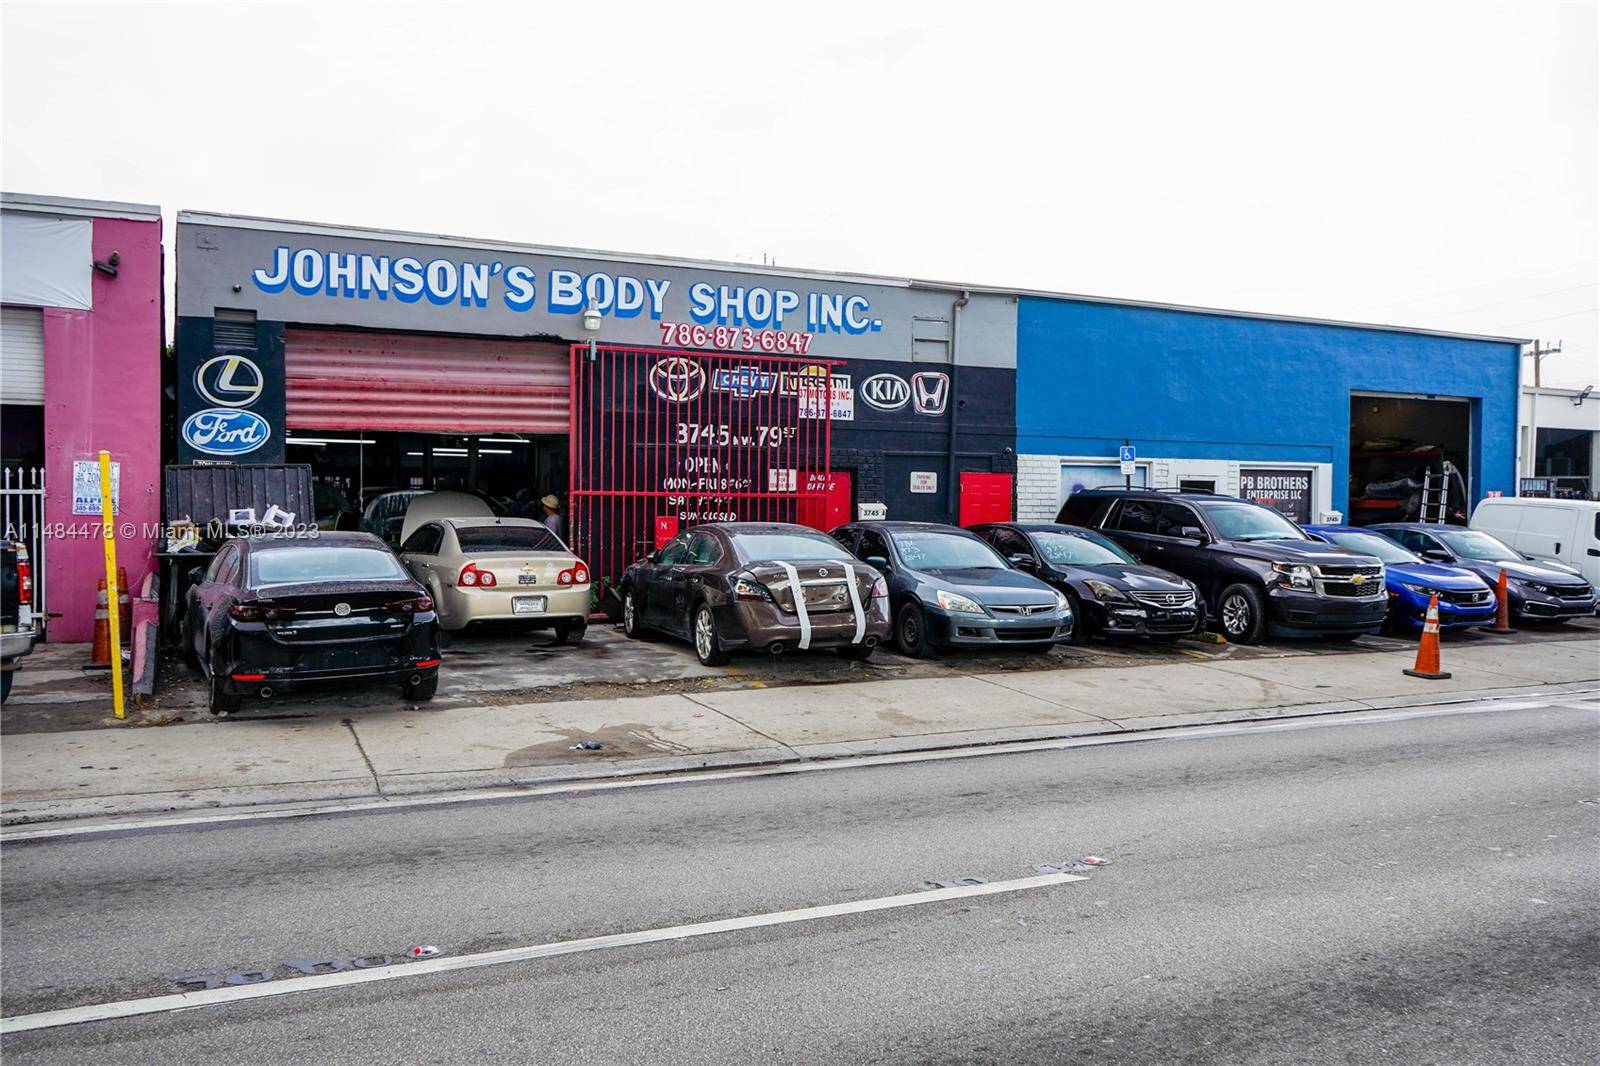 Rare opportunity in Hialeah's thriving 79th Street industrial corridor 7, 505 SF small bay warehouse facility ready for owner user or investment.